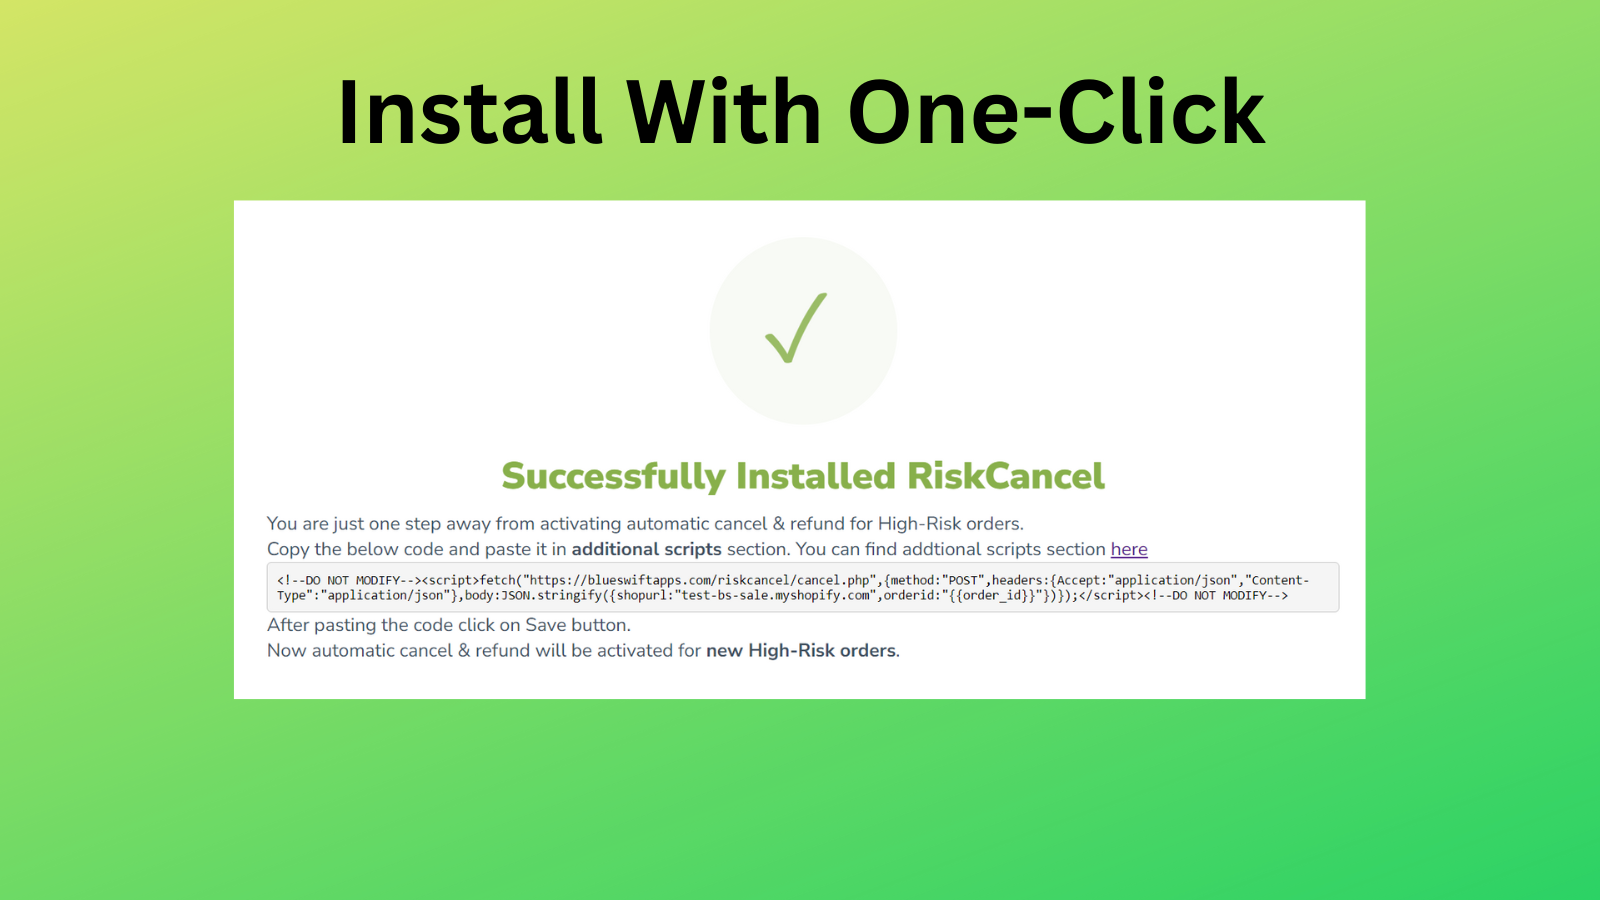 Install With One-Click